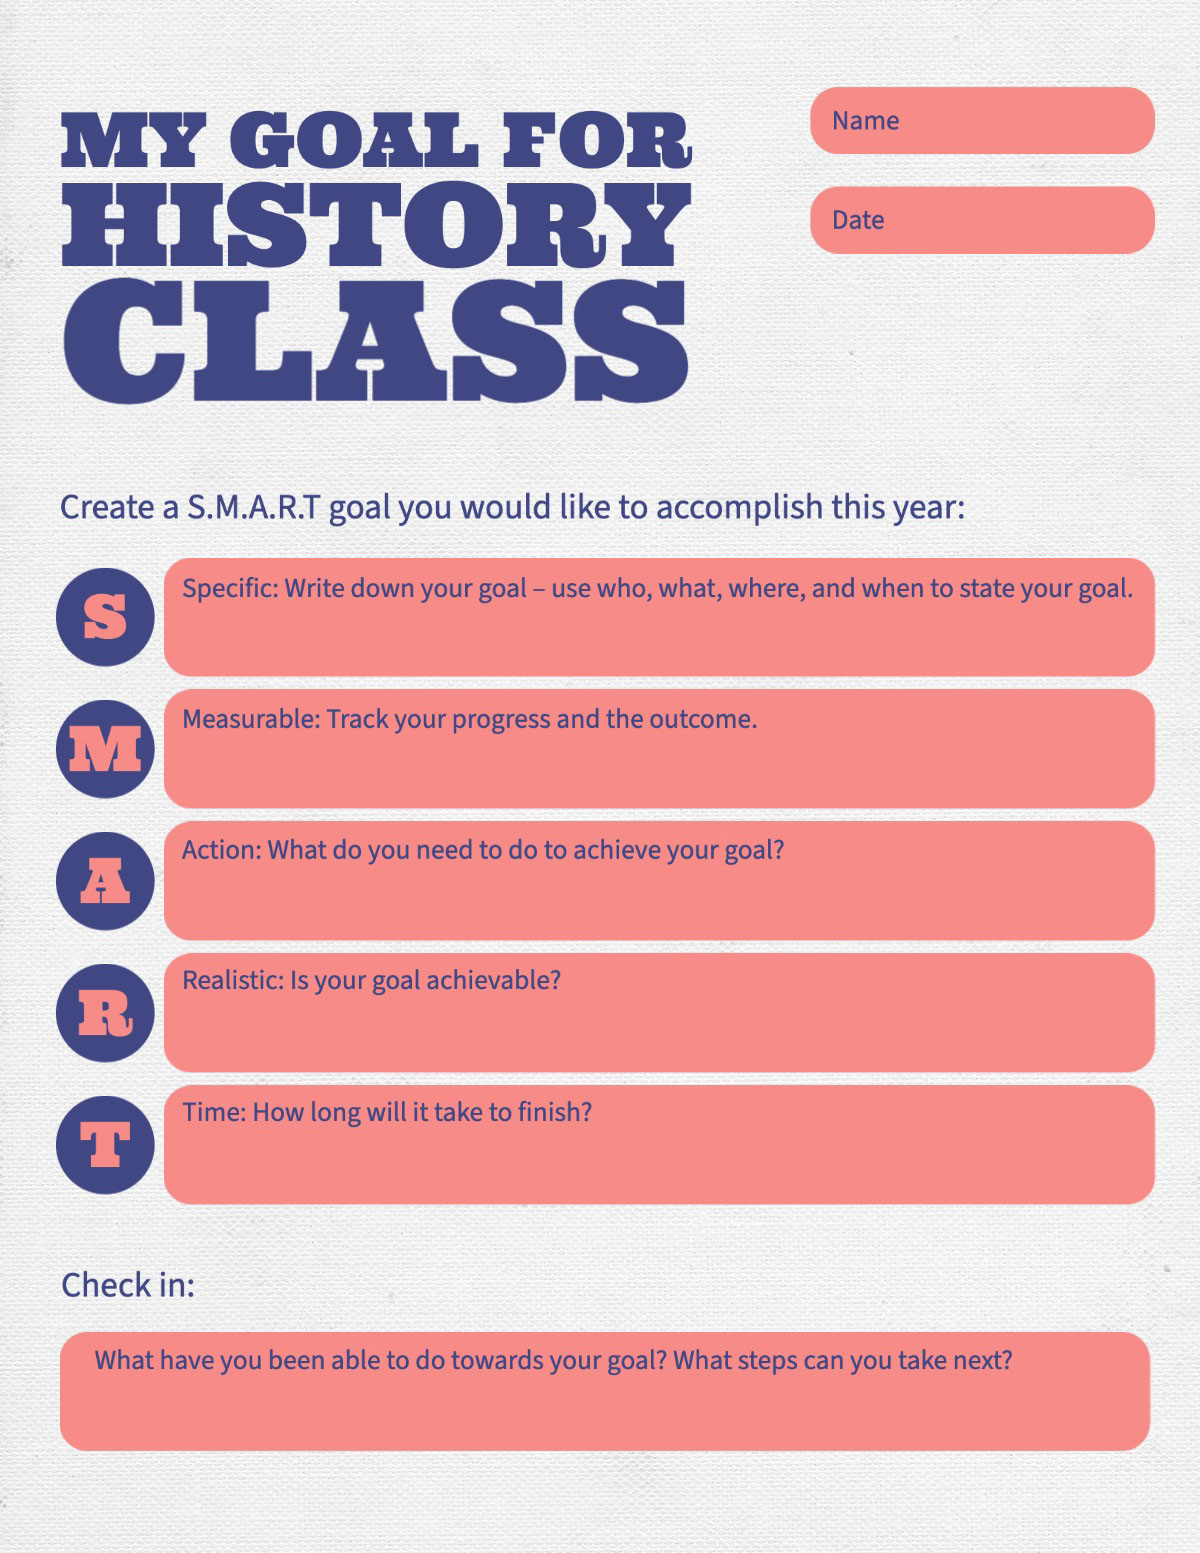 Red Blue SMART Goal Setting Academic Personal Student Worksheet My Goal For History class M R T A S Check in: Create a S.M.A.R.T goal you would like to accomplish this year: Name What have you been able to do towards your goal? What steps can you take next? Measurable: Track your progress and the outcome. Specific: Write down your goal – use who, what, where, and when to state your goal. Action: What do you need to do to achieve your goal? Date Realistic: Is your goal achievable? Time: How long will it take to finish?